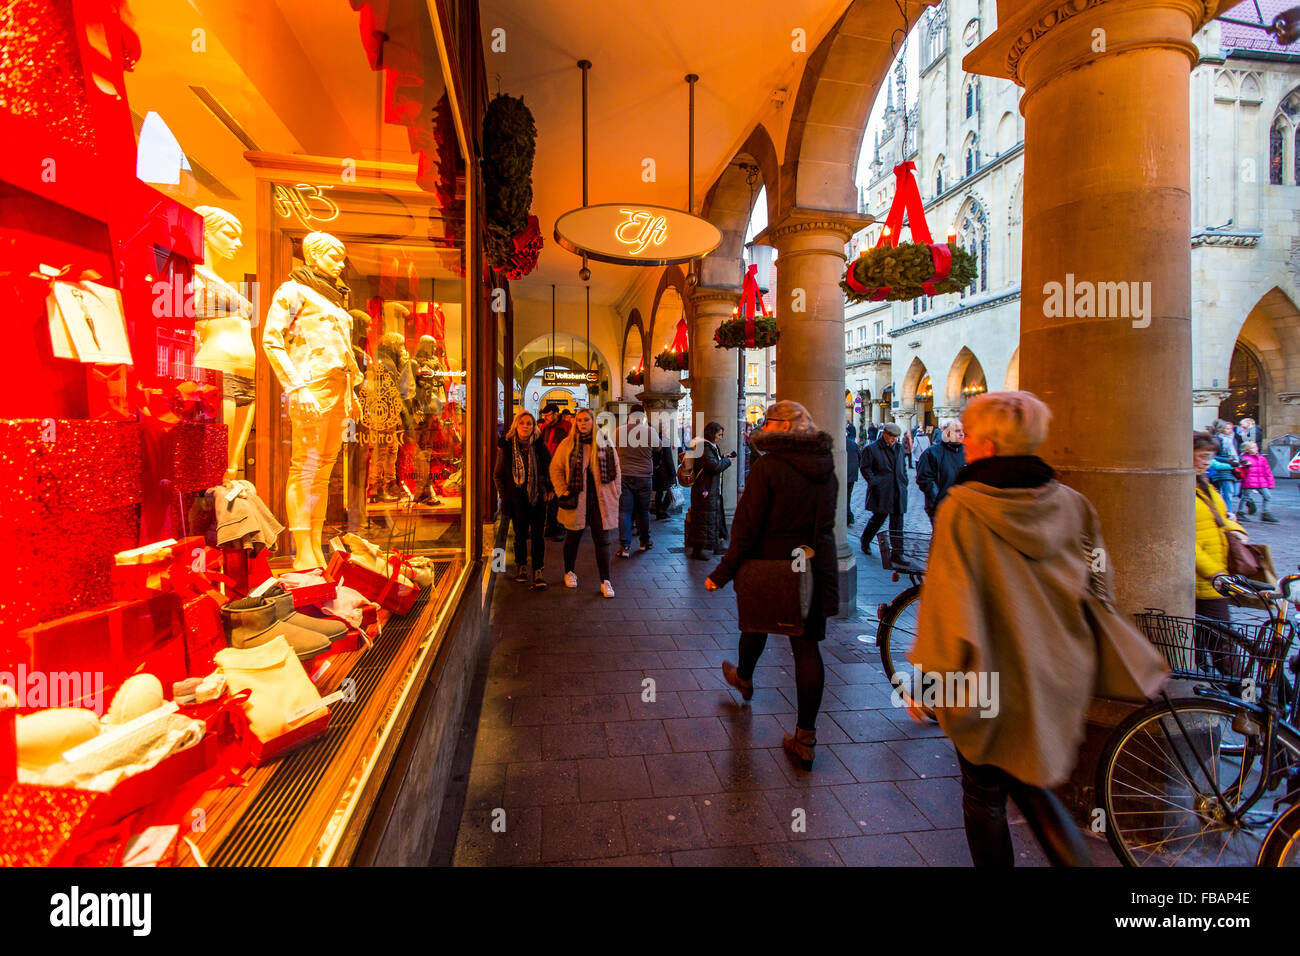 Old town city arcades in the old town, Münster, Westfalia, Germany, Christmas shopping, Stock Photo